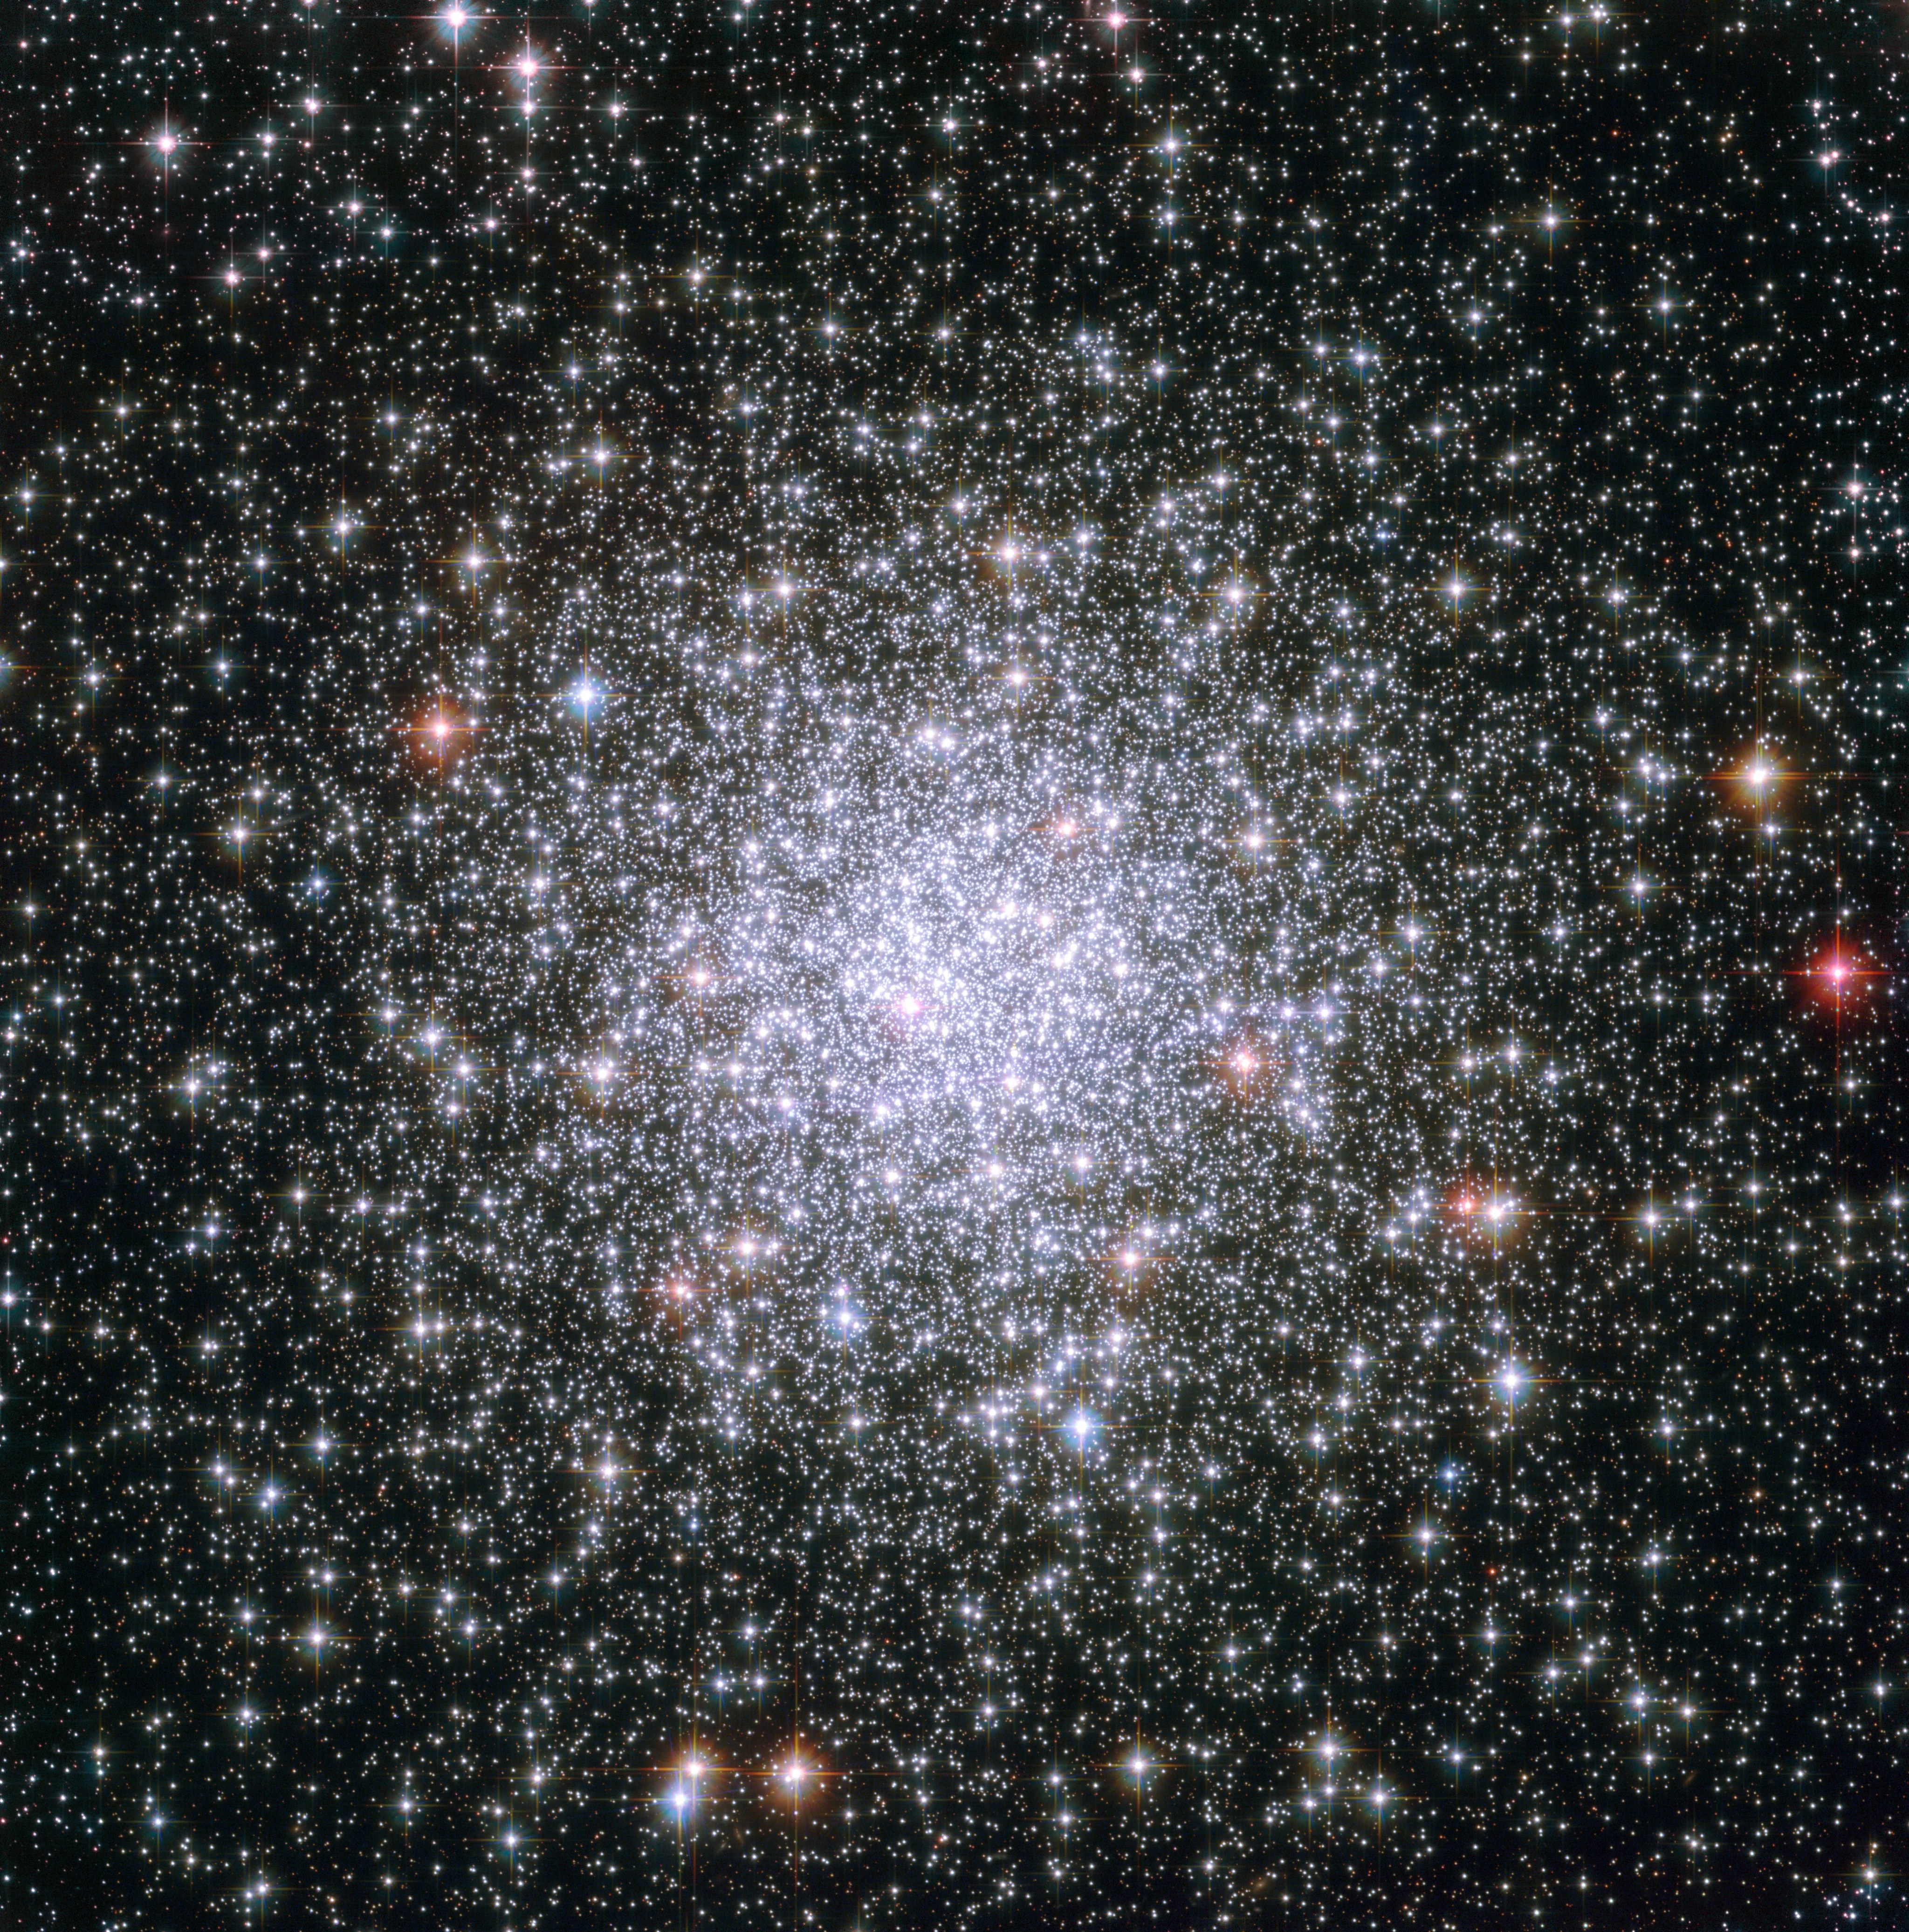 A cluster of bright stars, concentrated at the center.